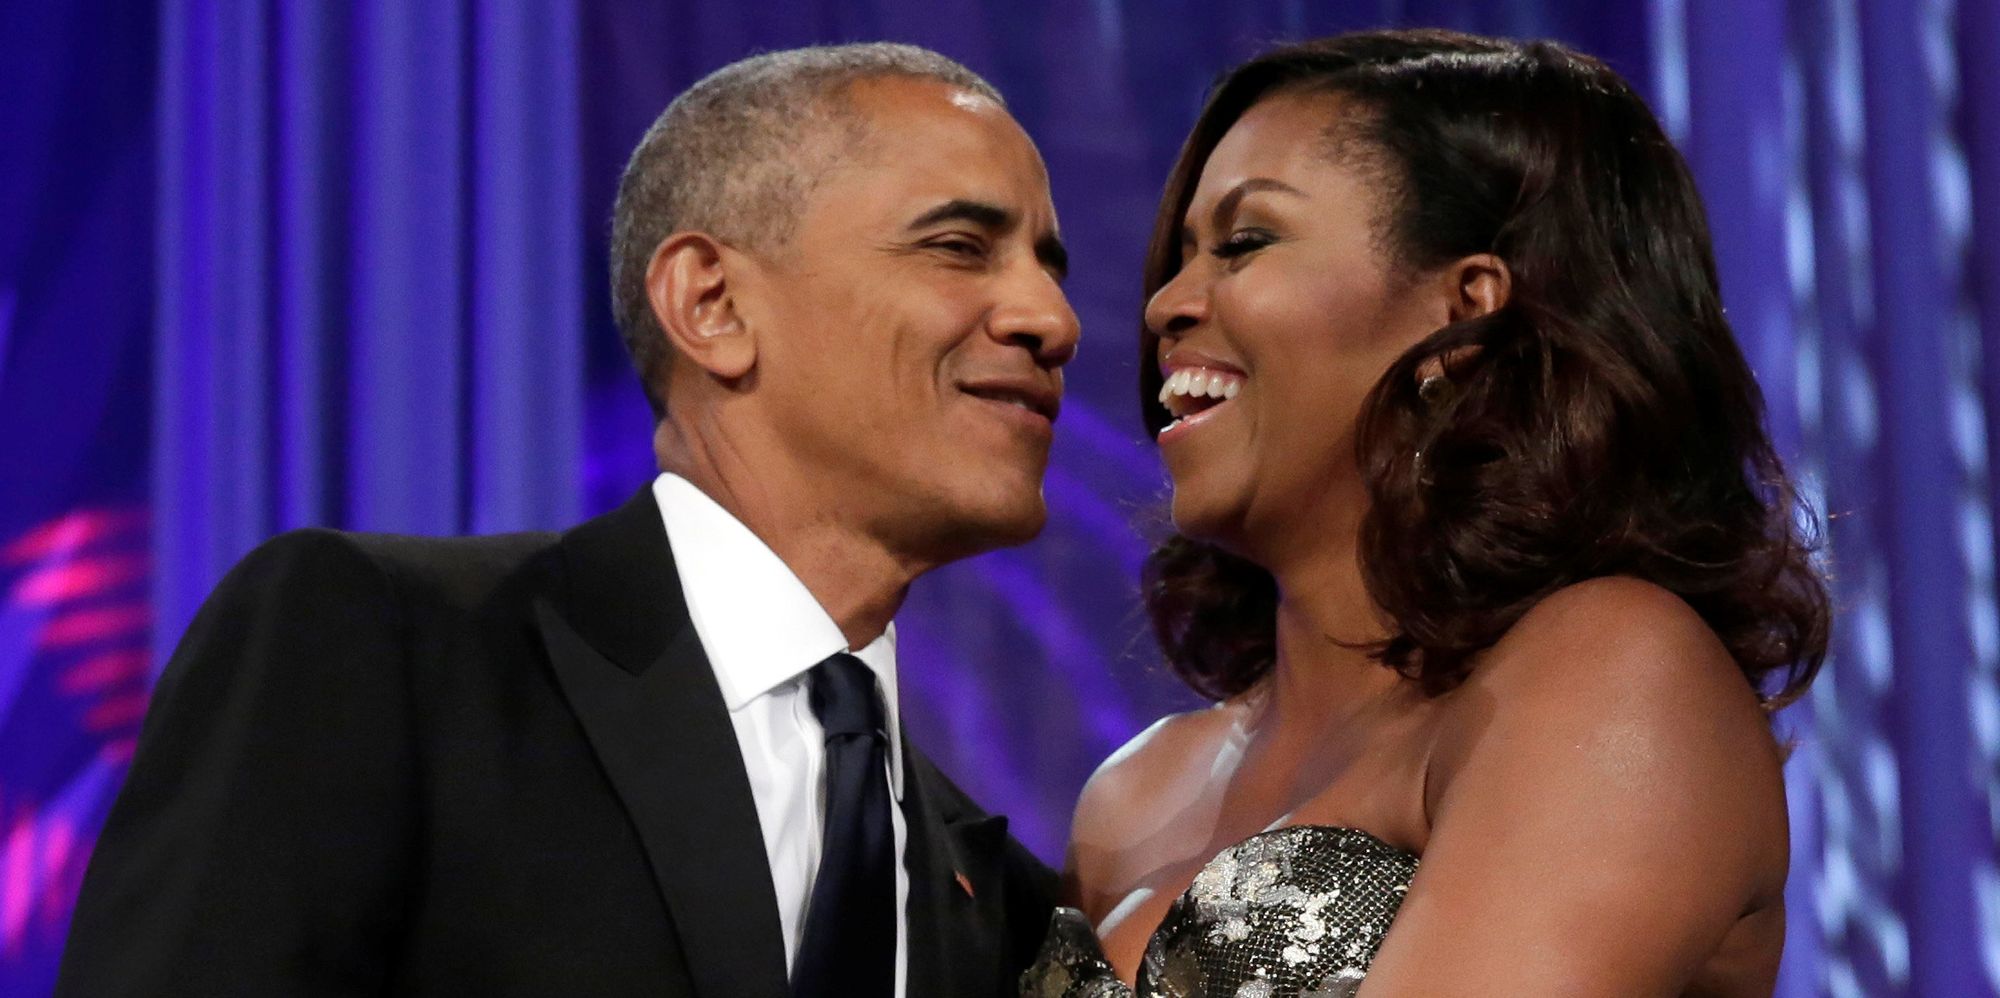 The Obamas Have Left The Building, But Not Social Media | The ... - Huffington Post